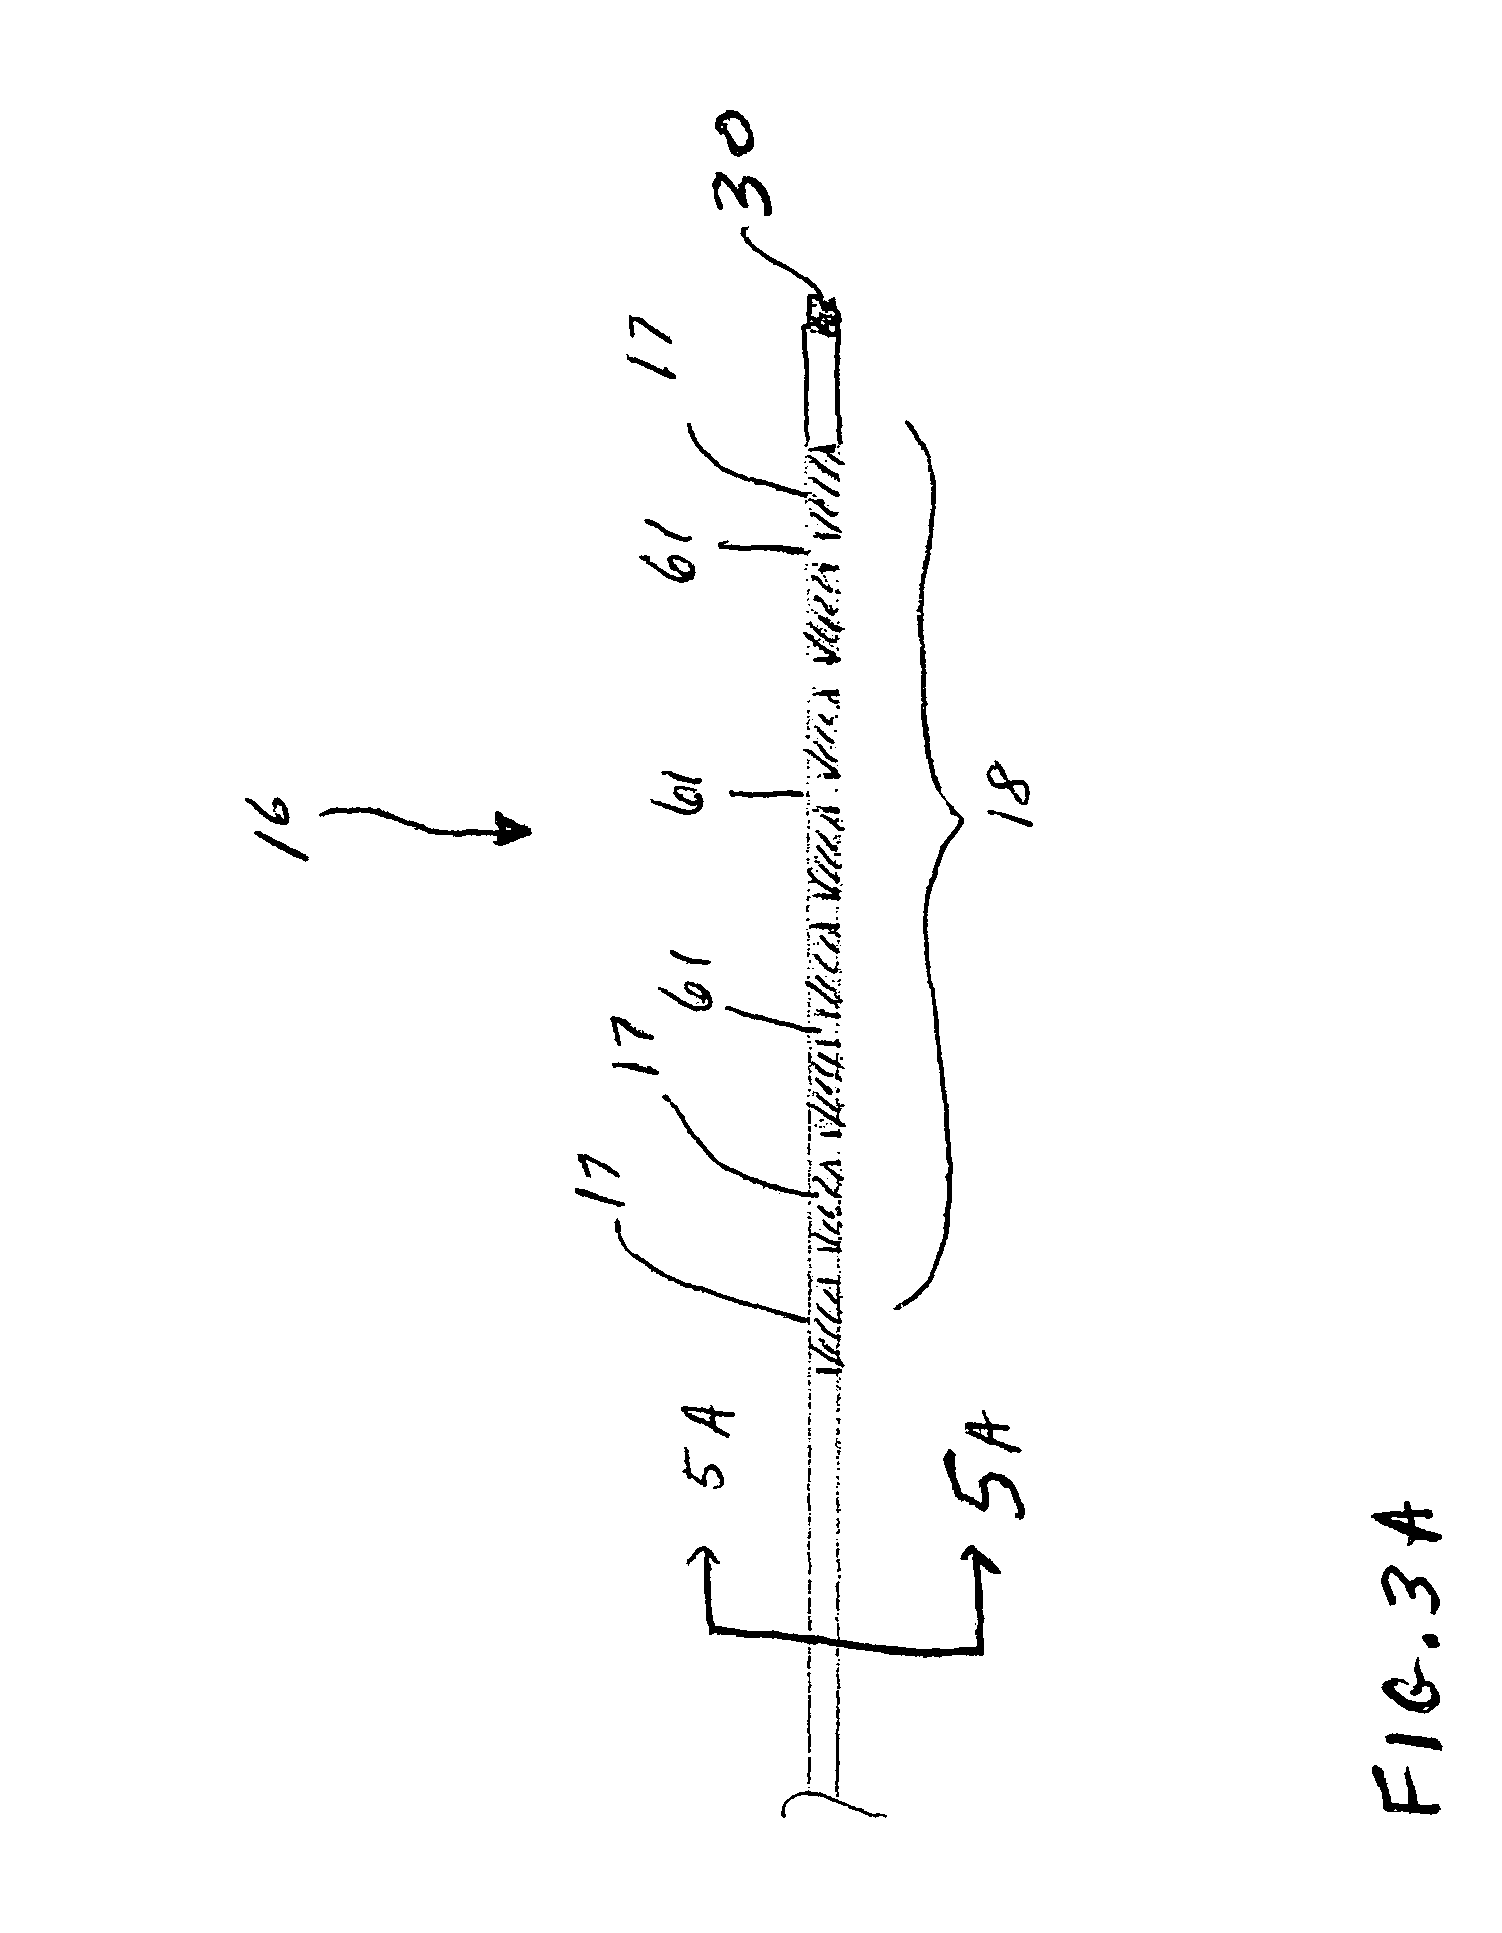 Electrode array assembly and method of making same